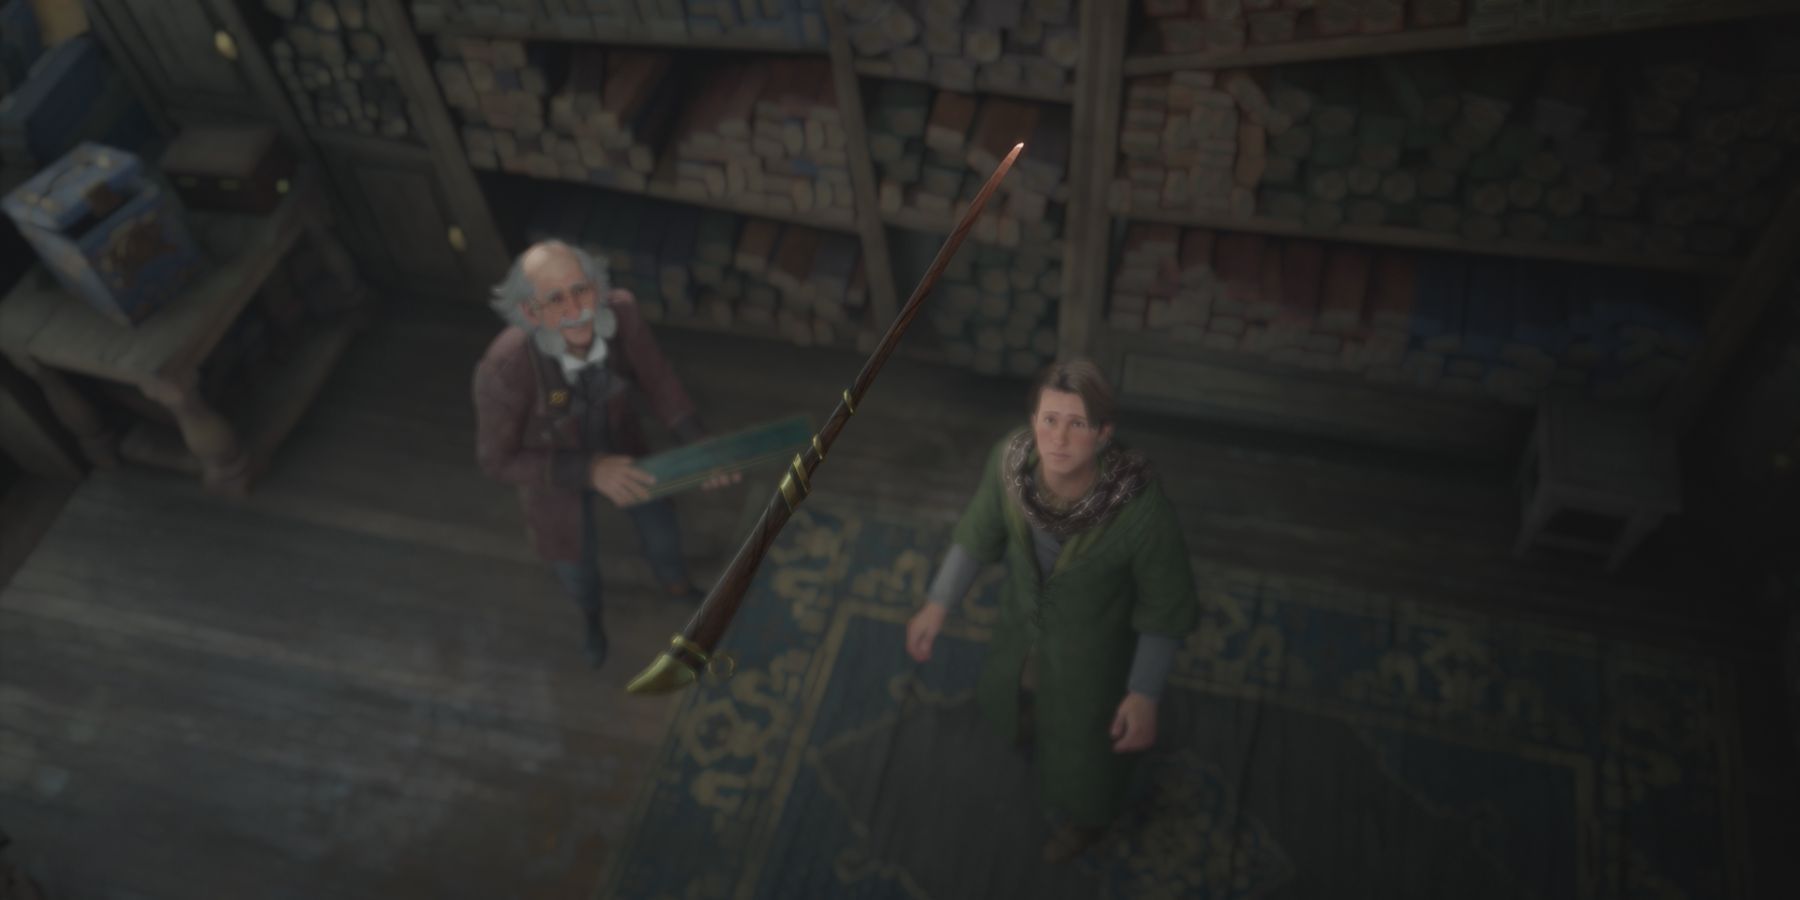 Hogwarts Legacy  All spells confirmed in the game - Meristation